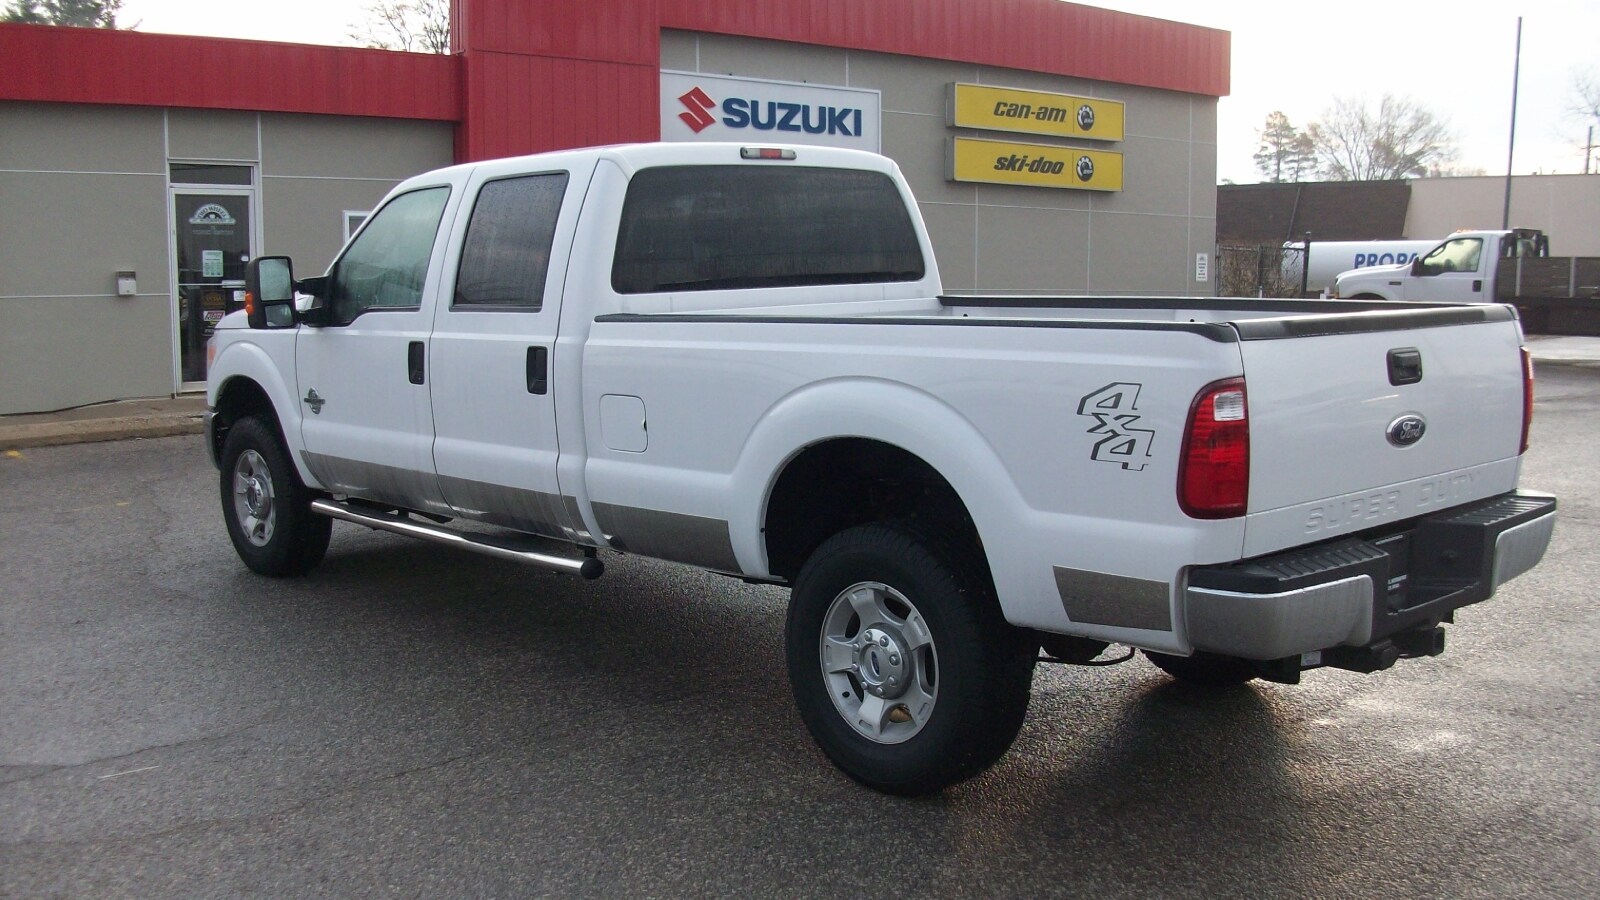 Used ford f250 for sale in canada #5